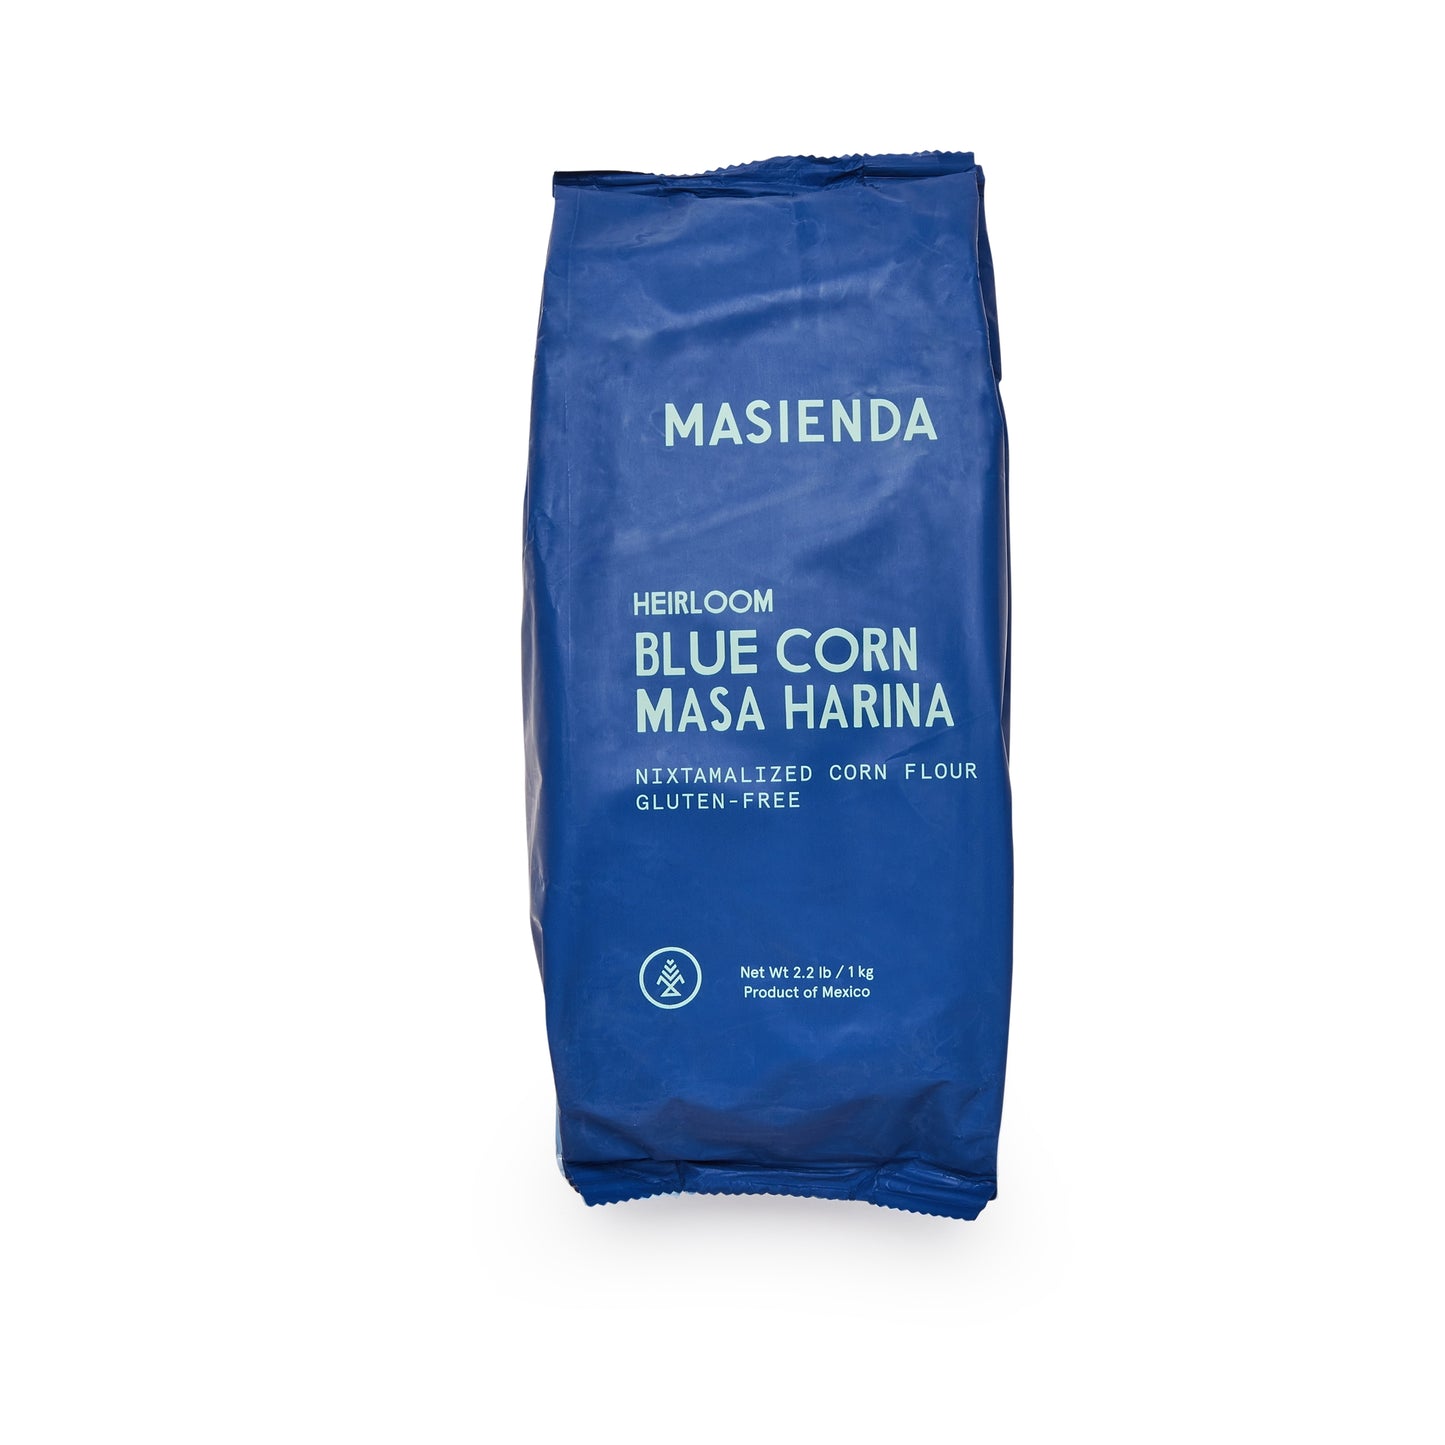 Masienda's best-selling Heirloom Blue Corn Masa Harina is a fine-ground nixtamalized corn flour. Its deep flavor comes from high quality heirloom corn, which is cooked, slow dried and milled to perfection in small batches. Never genetically modified. Always gluten-free.